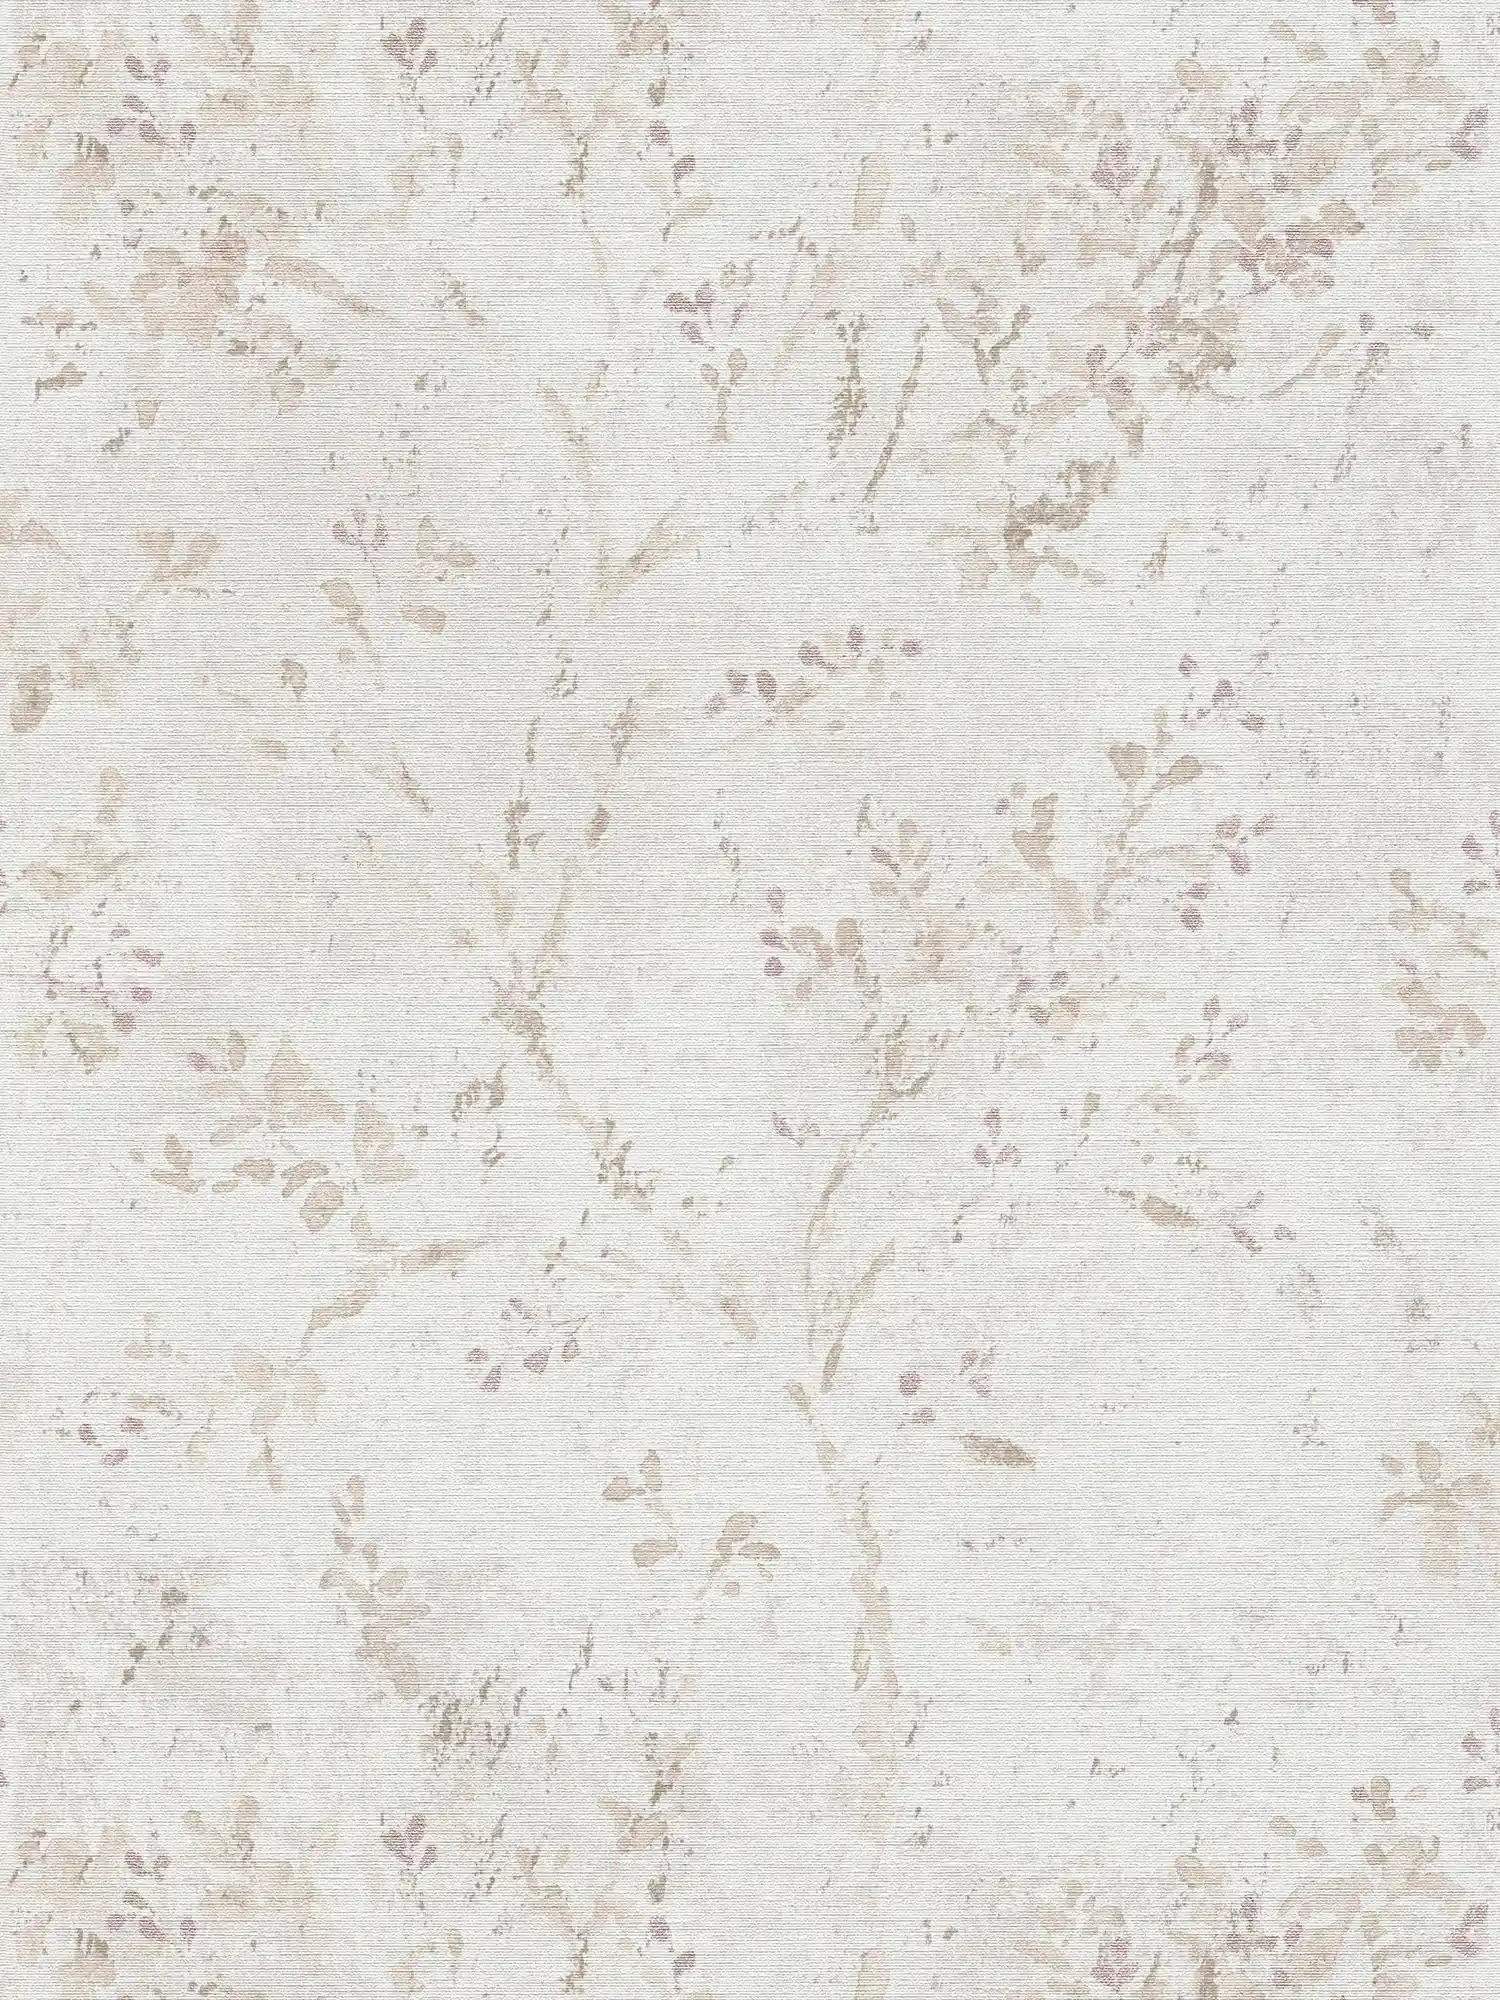 Non-woven wallpaper with a playful floral pattern - grey, beige, purple
